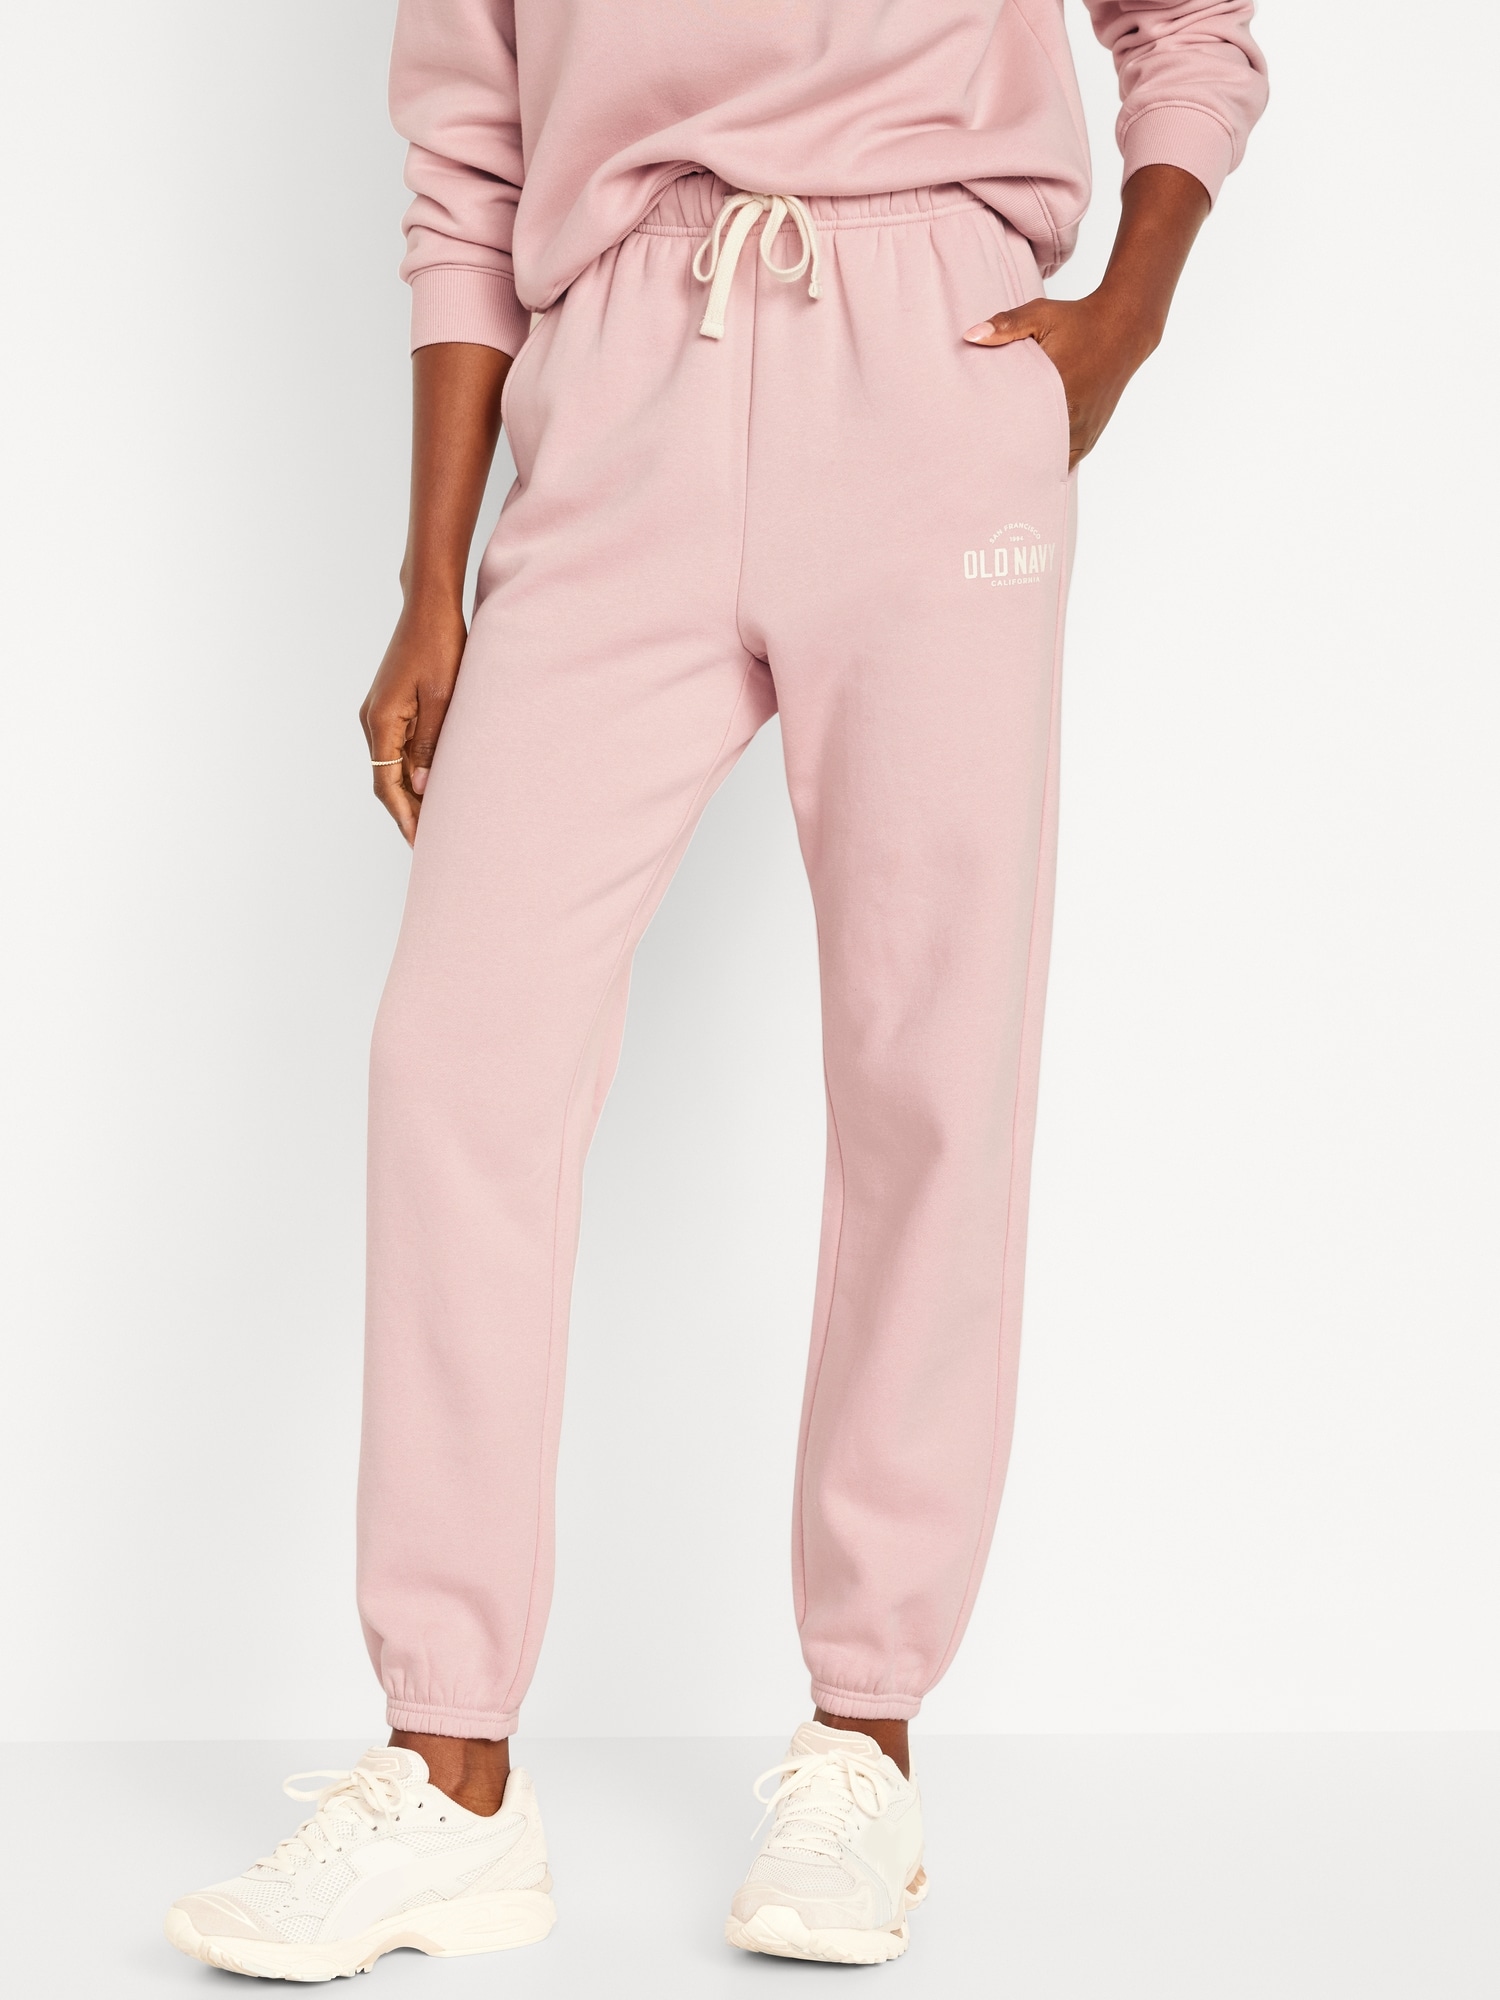 Joggers for Stay at Home Stylish Comfort - Karen Tarver Style